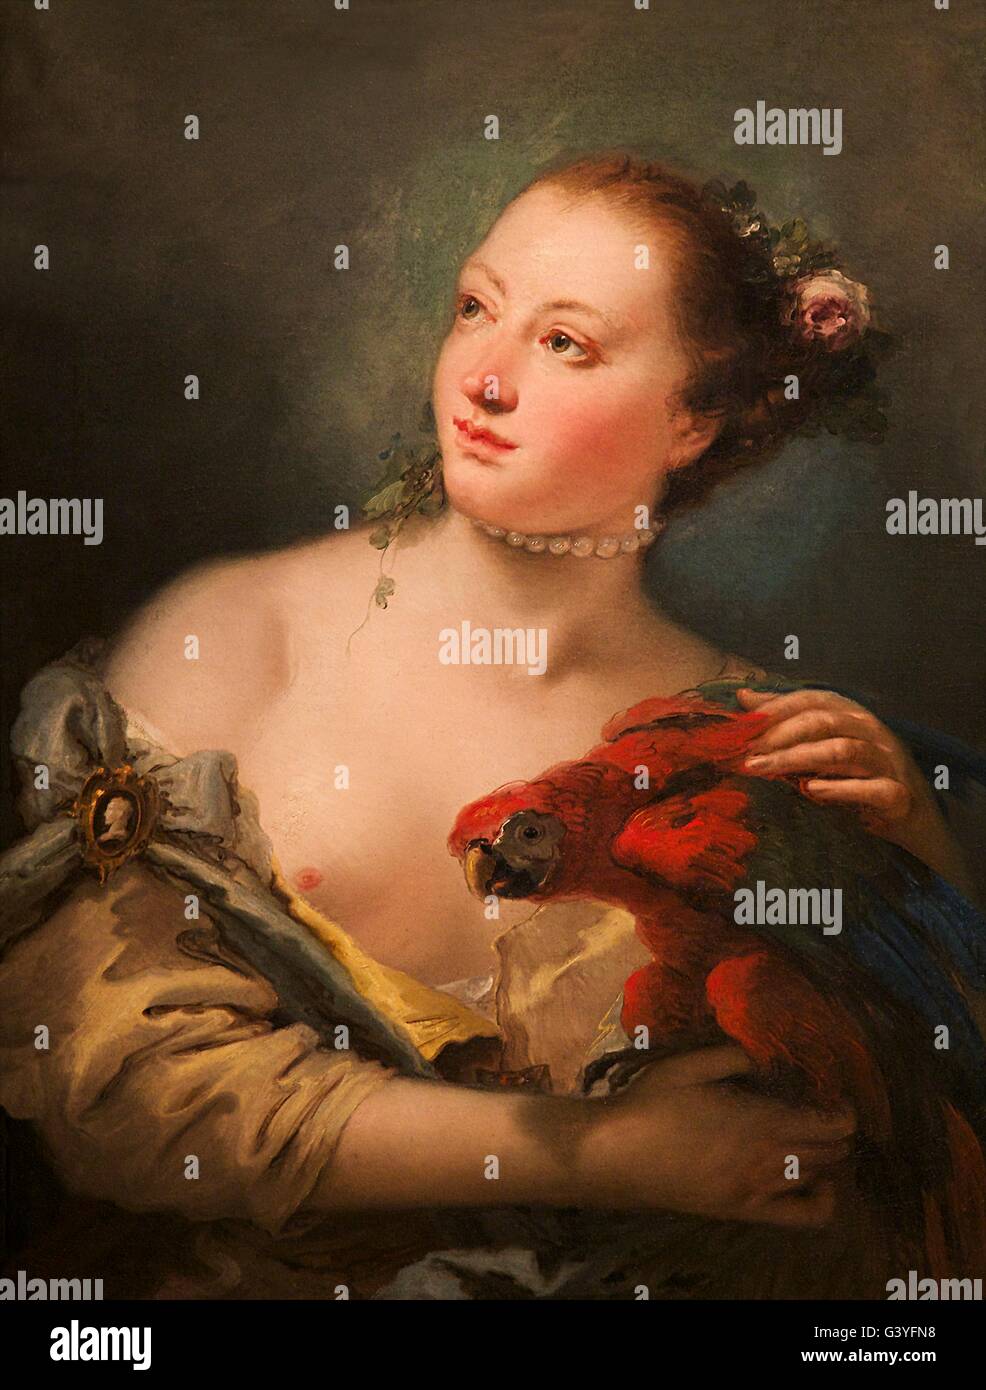 Young Woman with a Macaw, by Giovanni Battista Tiepolo, 1760, Ashmolean Museum, Oxford, Oxfordshire, England, UK, GB, Europe Stock Photo